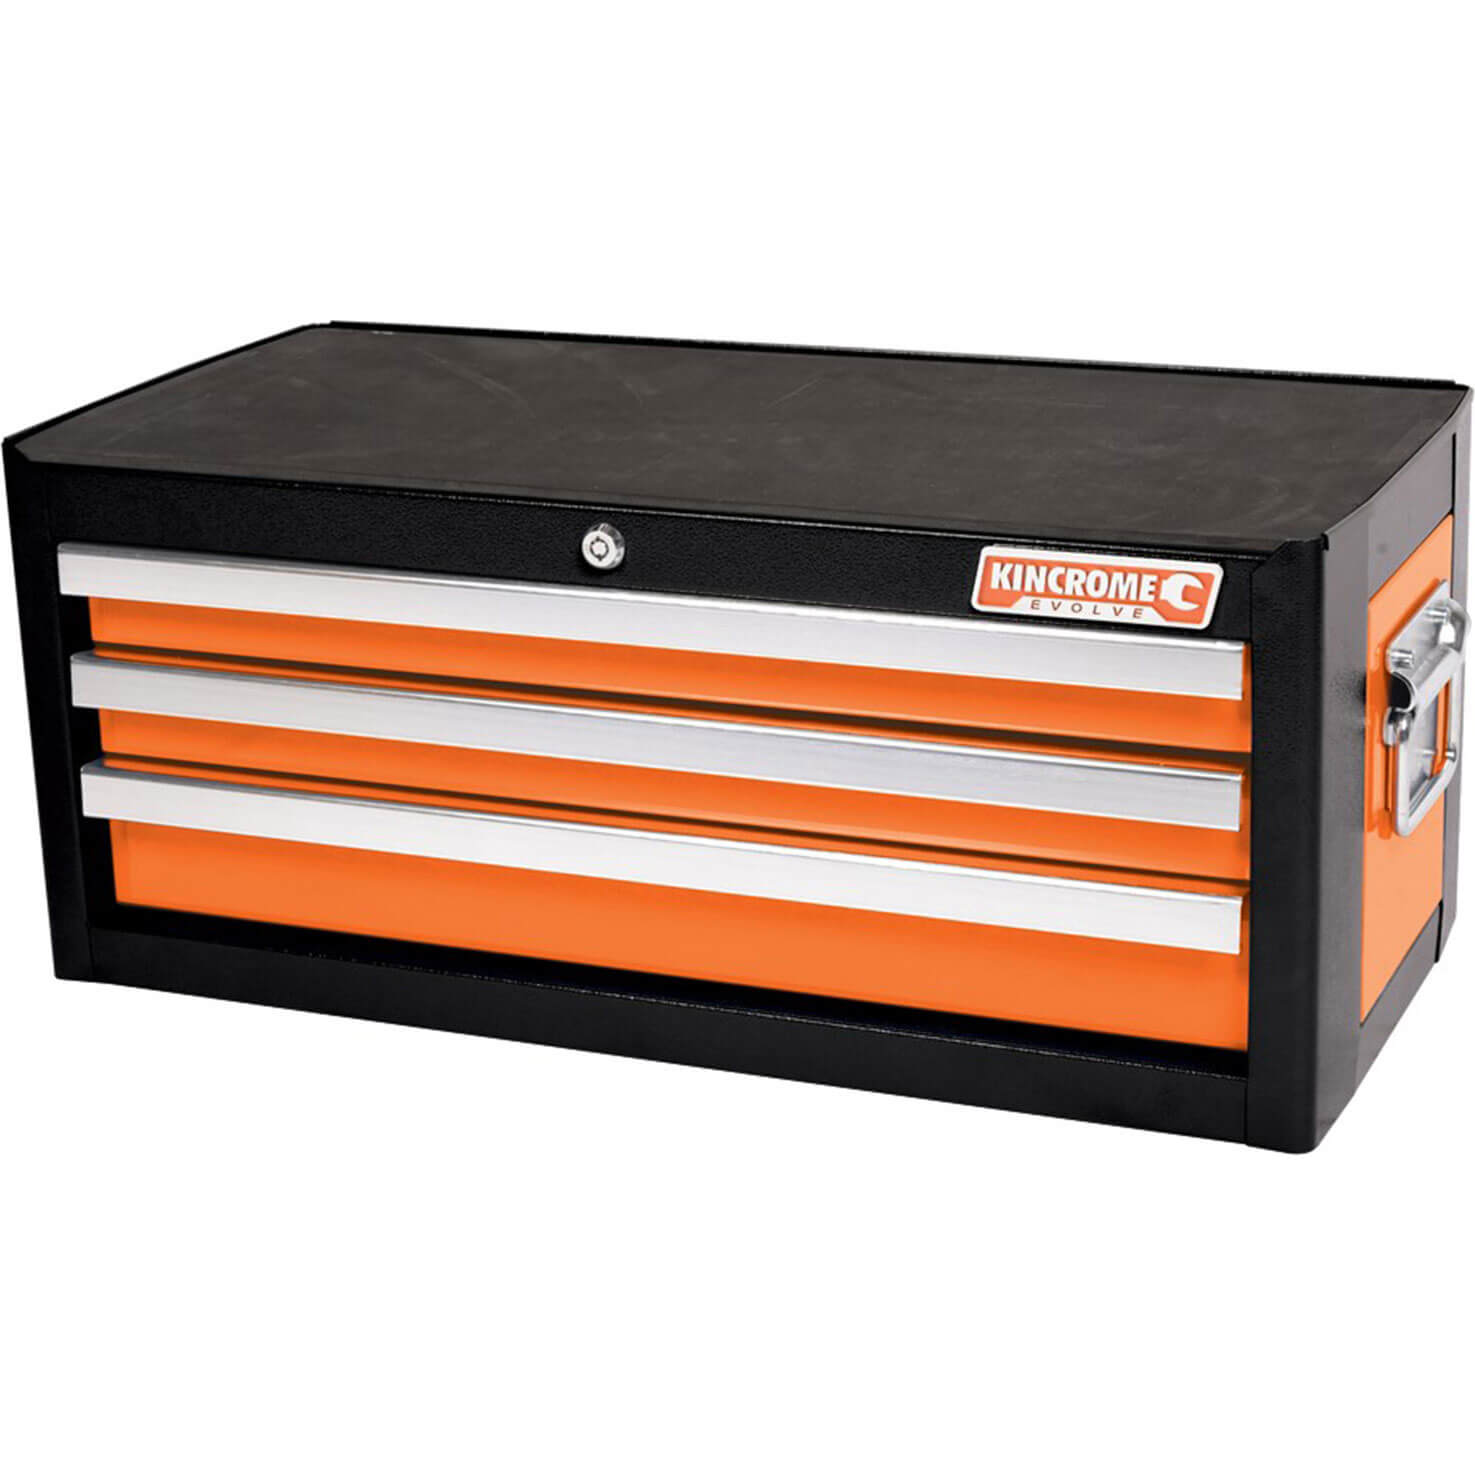 Image of Kincrome Evolve 3 Drawer Add On Tool Chest Orange